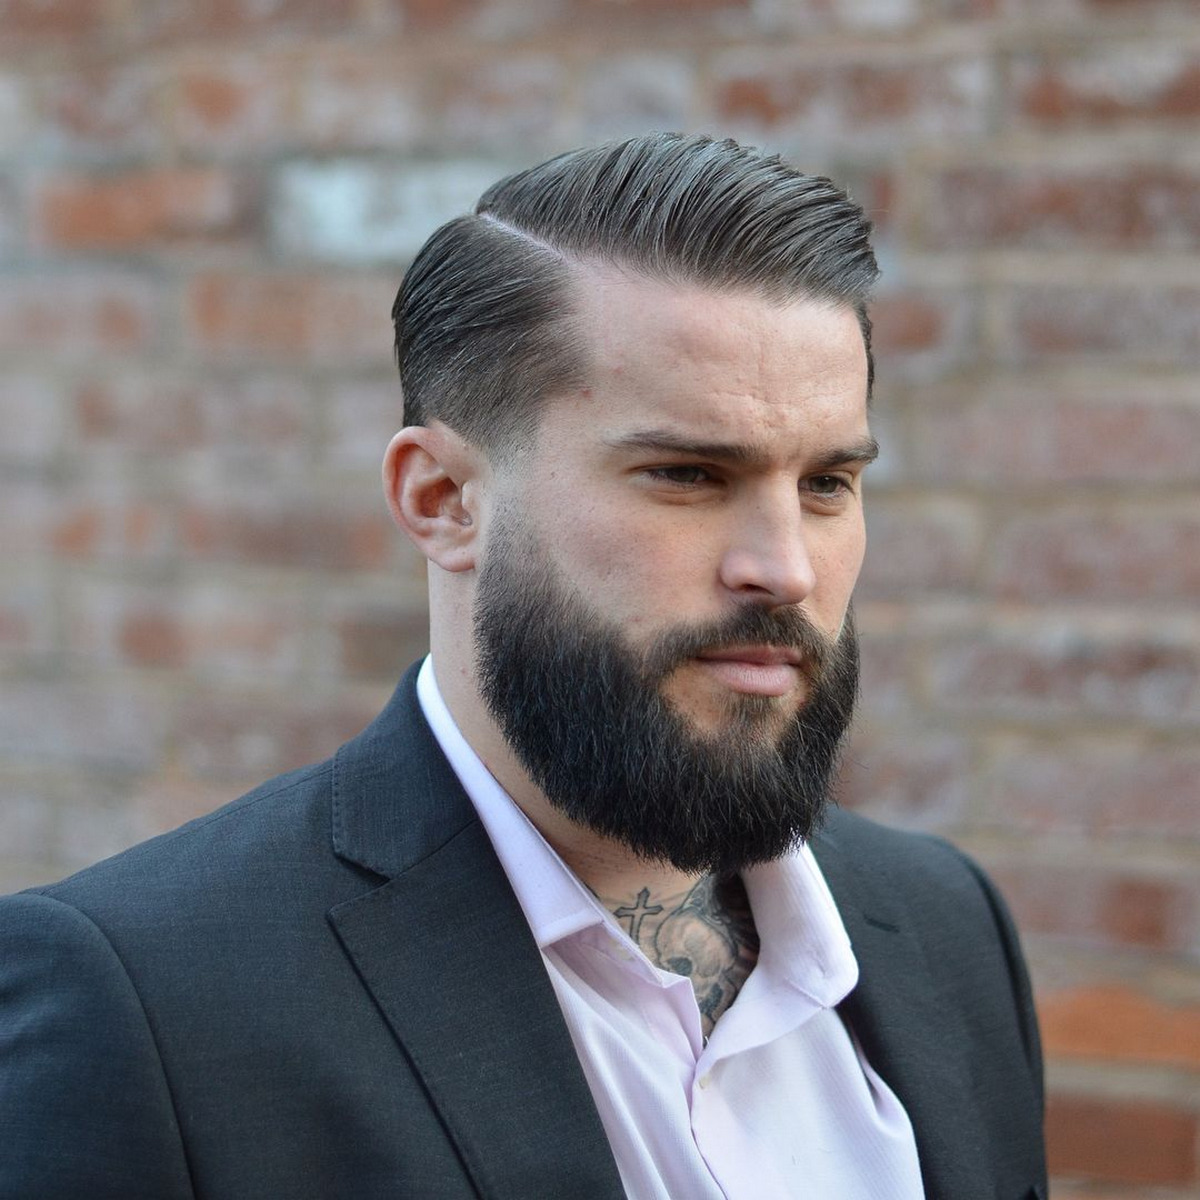 Combover With Accurate Side Part And Facial Hairstyle 